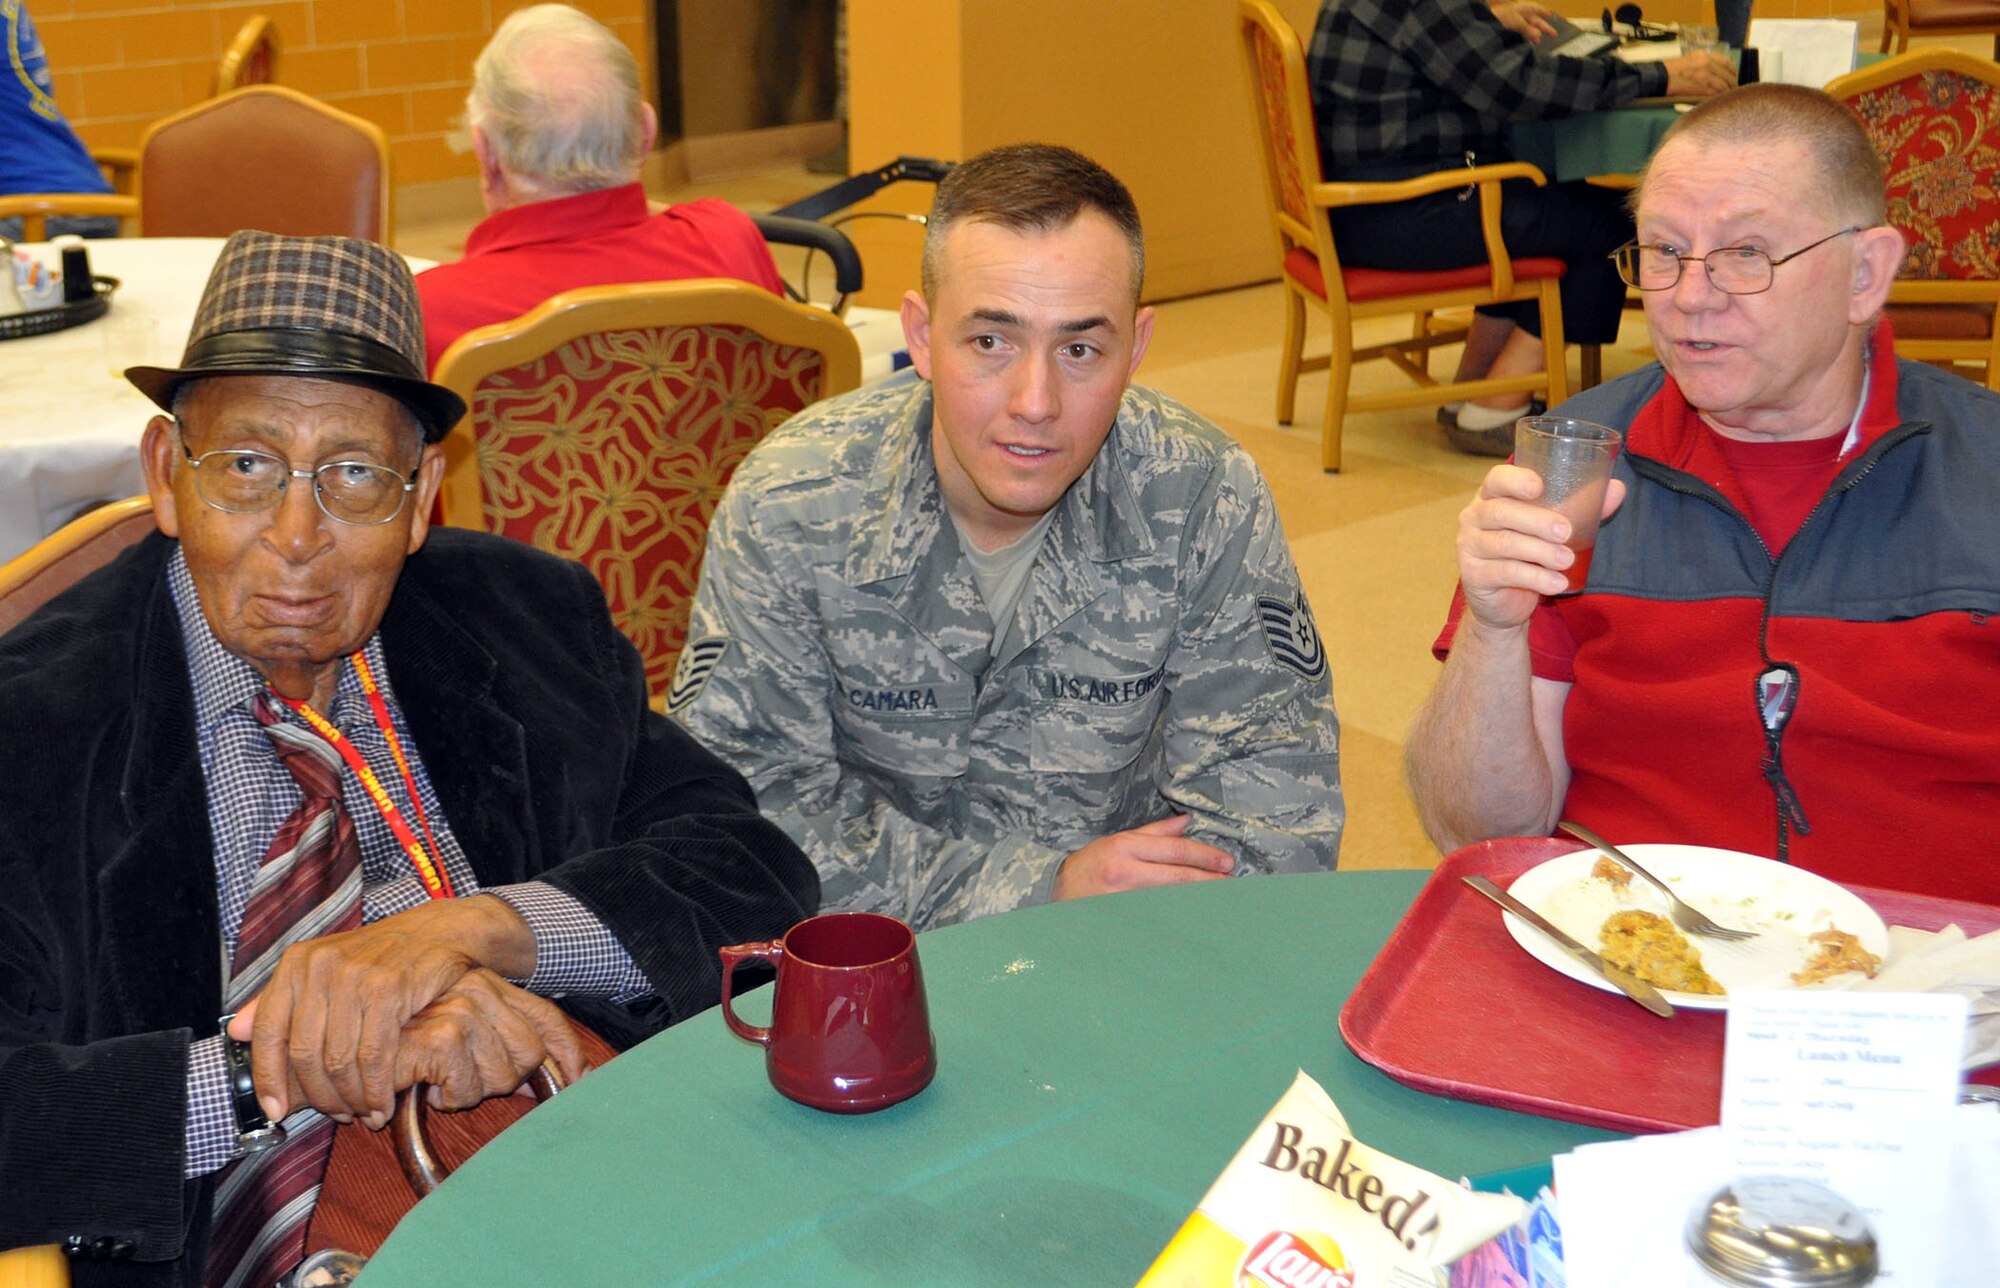 TRAVIS AIR FORCE BASE, Calif. -- Technical Sgt. Antonio Da Camara, 349th Force Support Squadron, visits with two veterans at the Yountville Veterans Home on Thanksgiving Day. Da Camara brought along his wife and daughter to share in the joy of serving the holiday meal, and the chance to visit with those who paved the way for today's military. Sharing Thanksgiving with our veterans has been a tradition for a number of years, for Travis Airmen. (U.S. Air Force photo/SMSgt. (ret) Ellen Hatfield)
